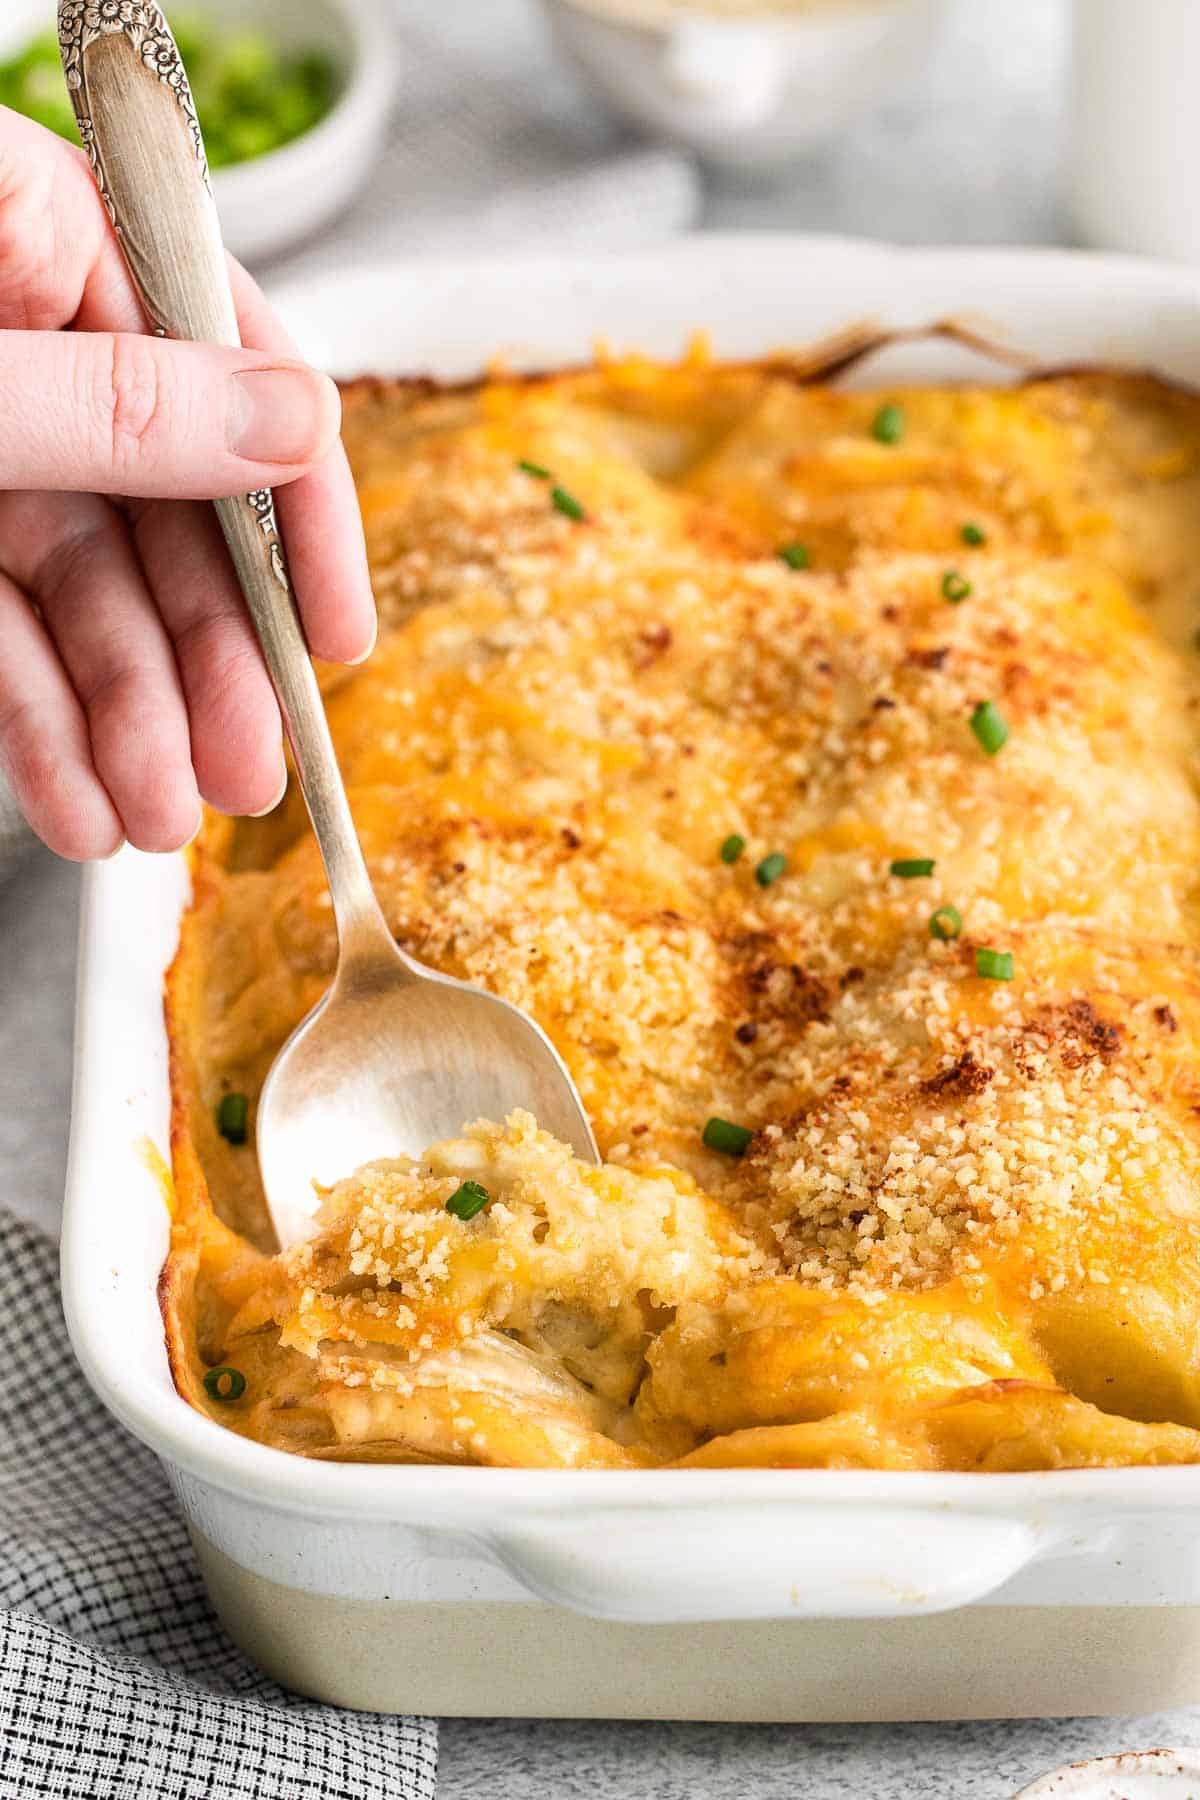 spoon scooped into a casserole dish of scalloped potatoes.